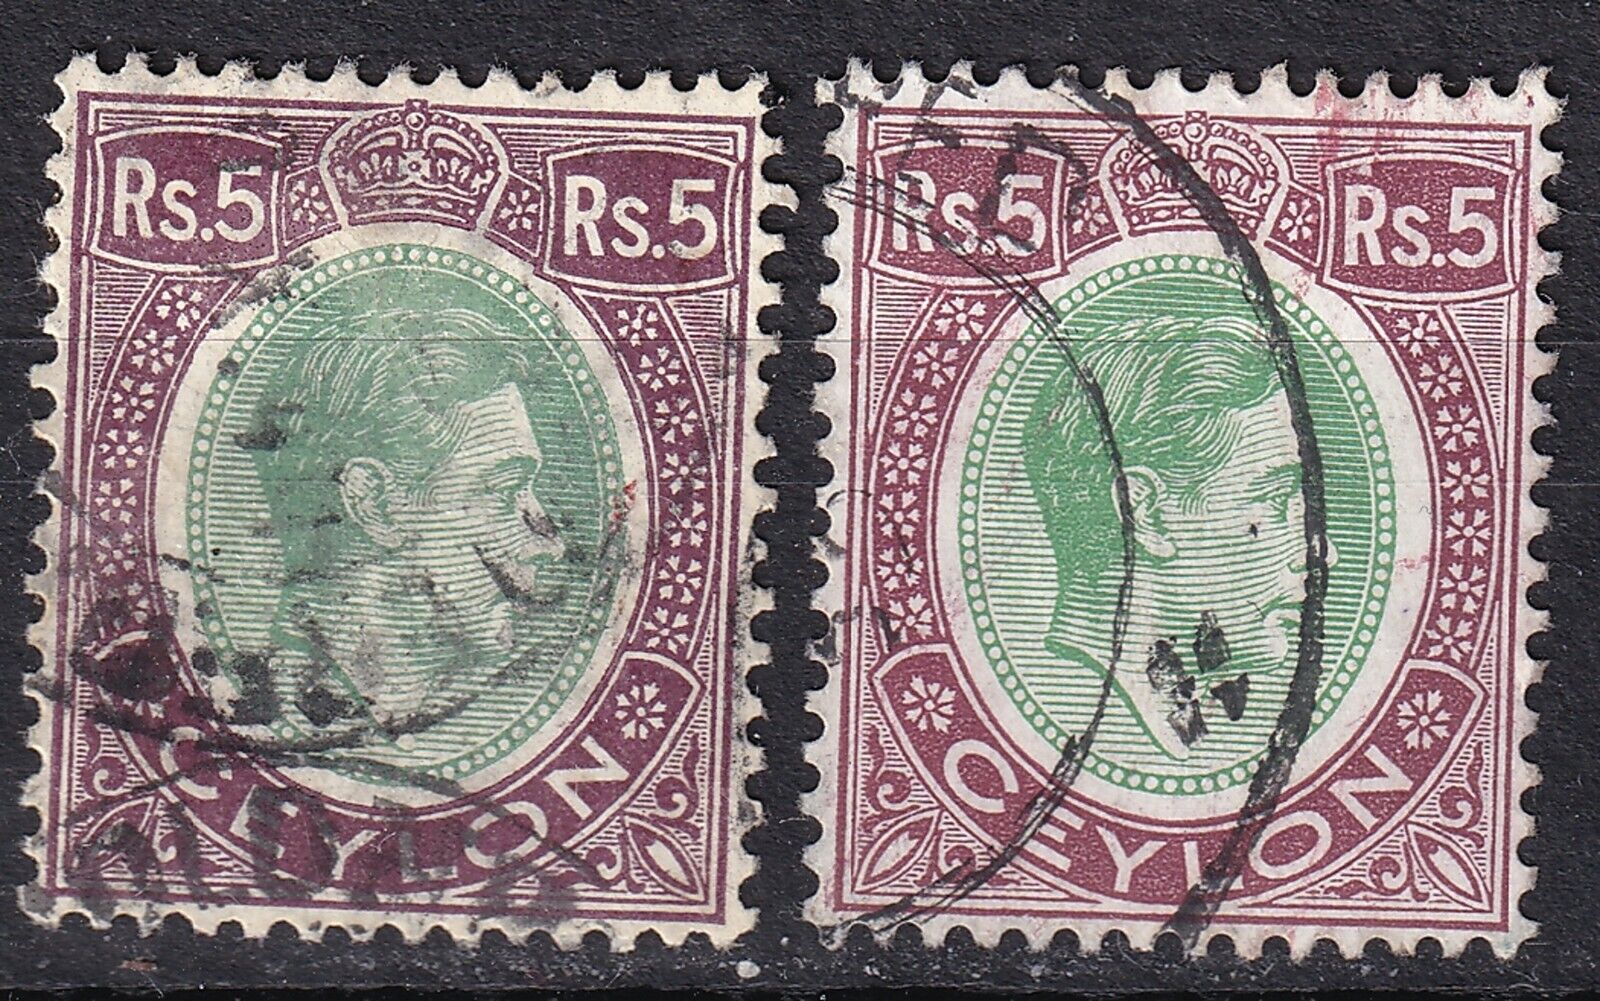 Ceylon Some reservation 1938 2 Over item handling 5r x used